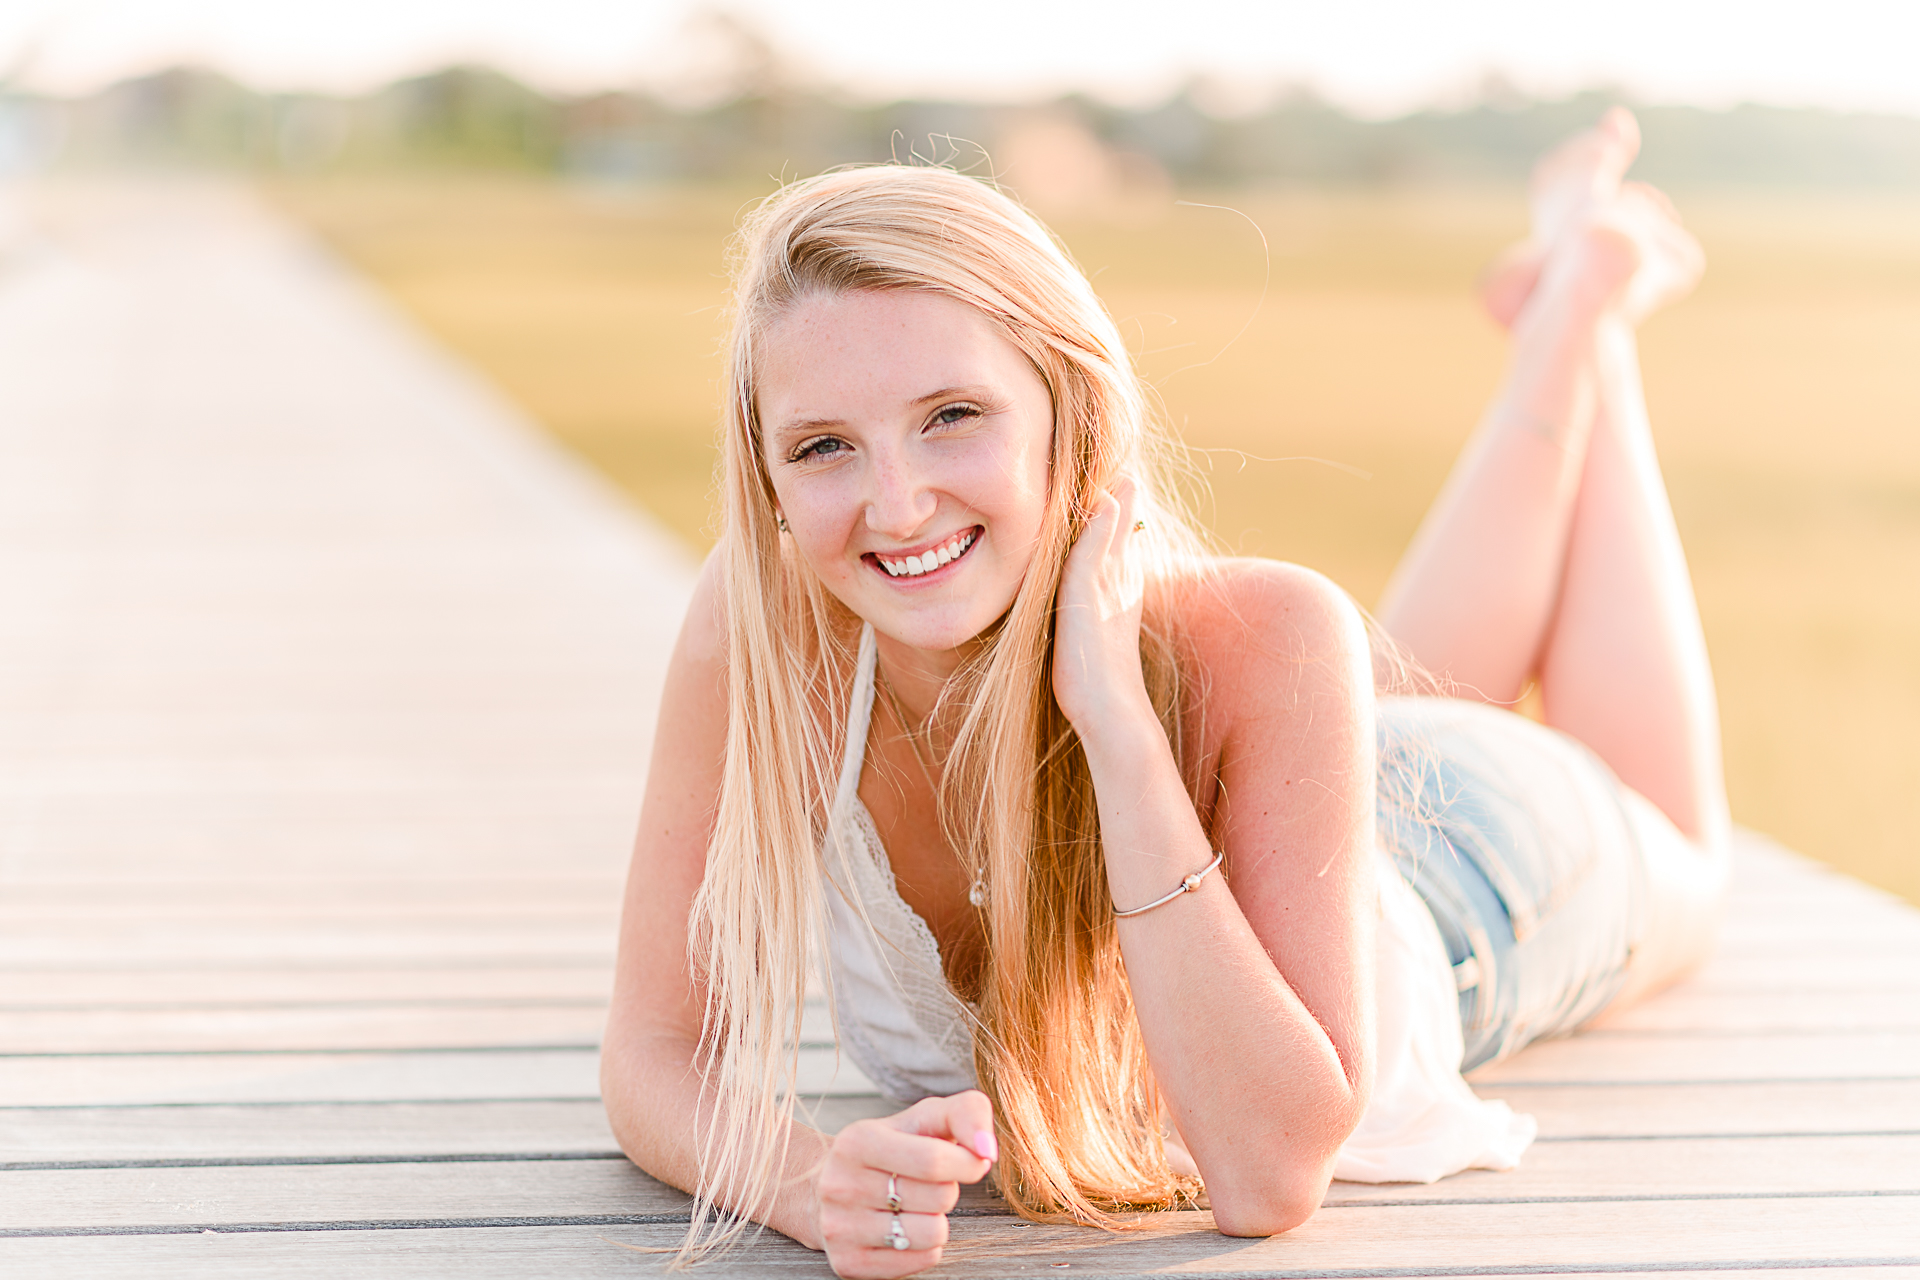 Photo by Cape Cod Senior Portrait Photographer Christina Runnals | High school senior girl laying on her stomach on a boardwalk smiling at the camera